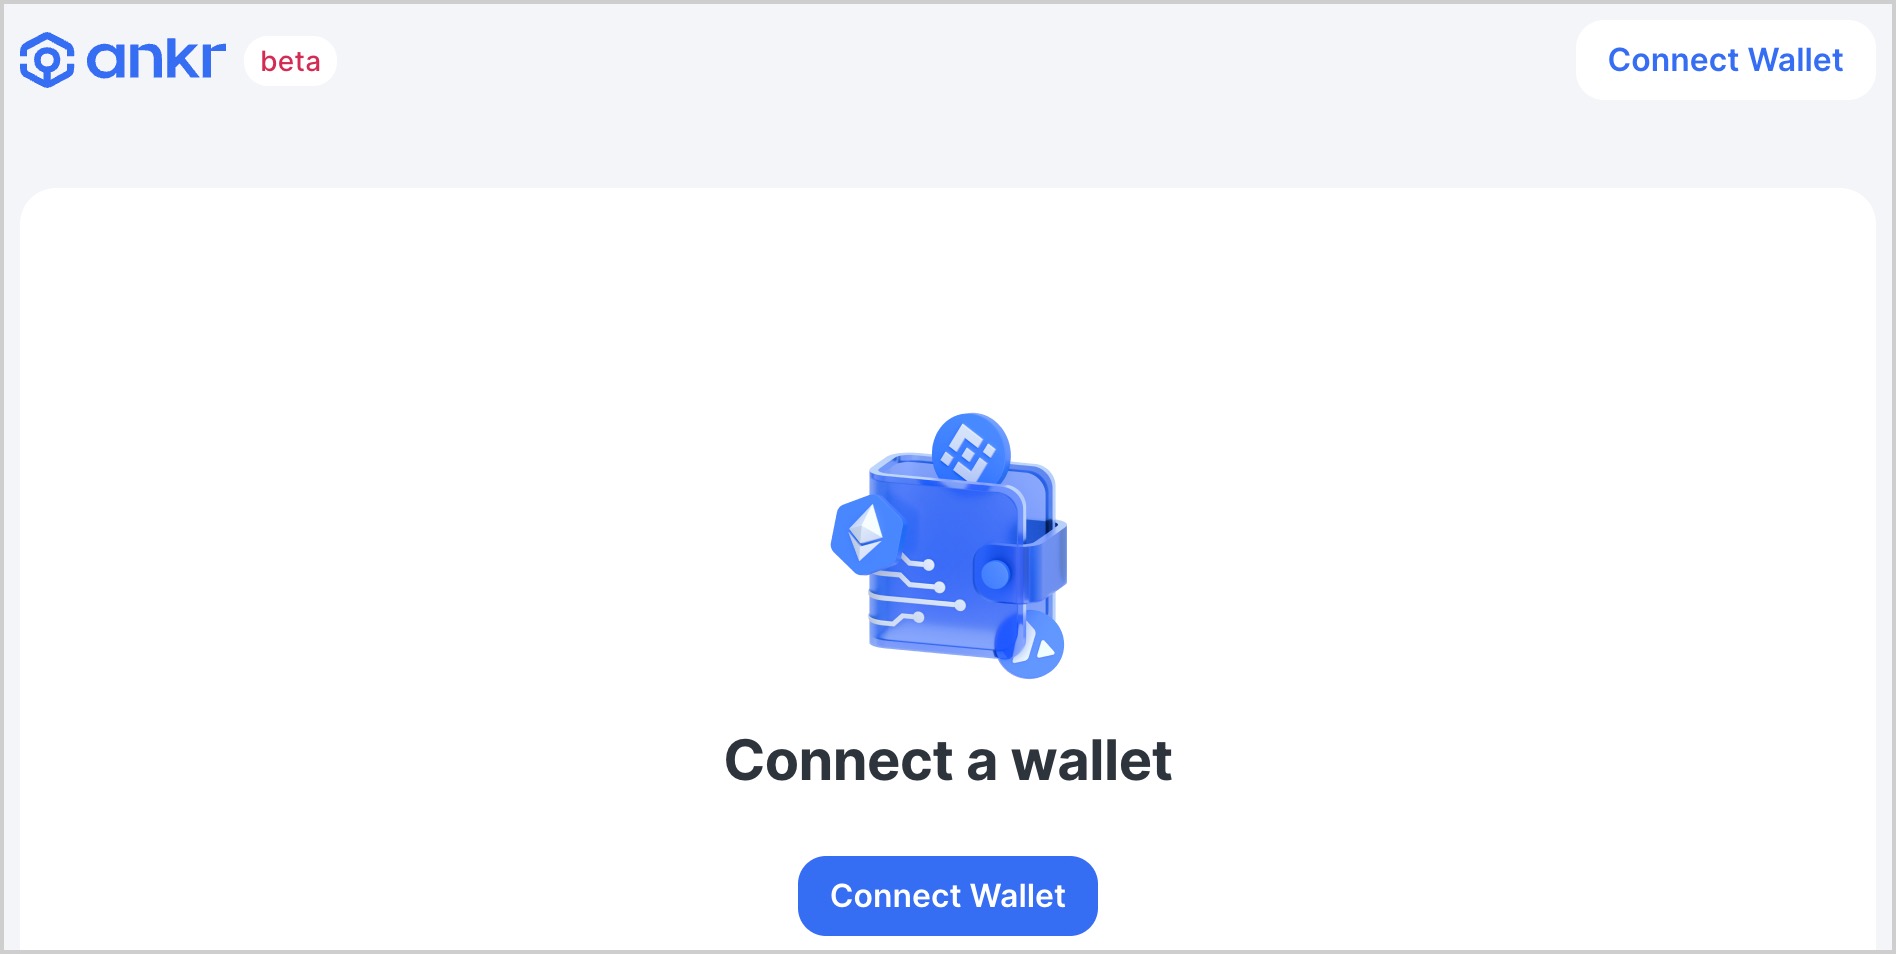 Click the connect wallet button